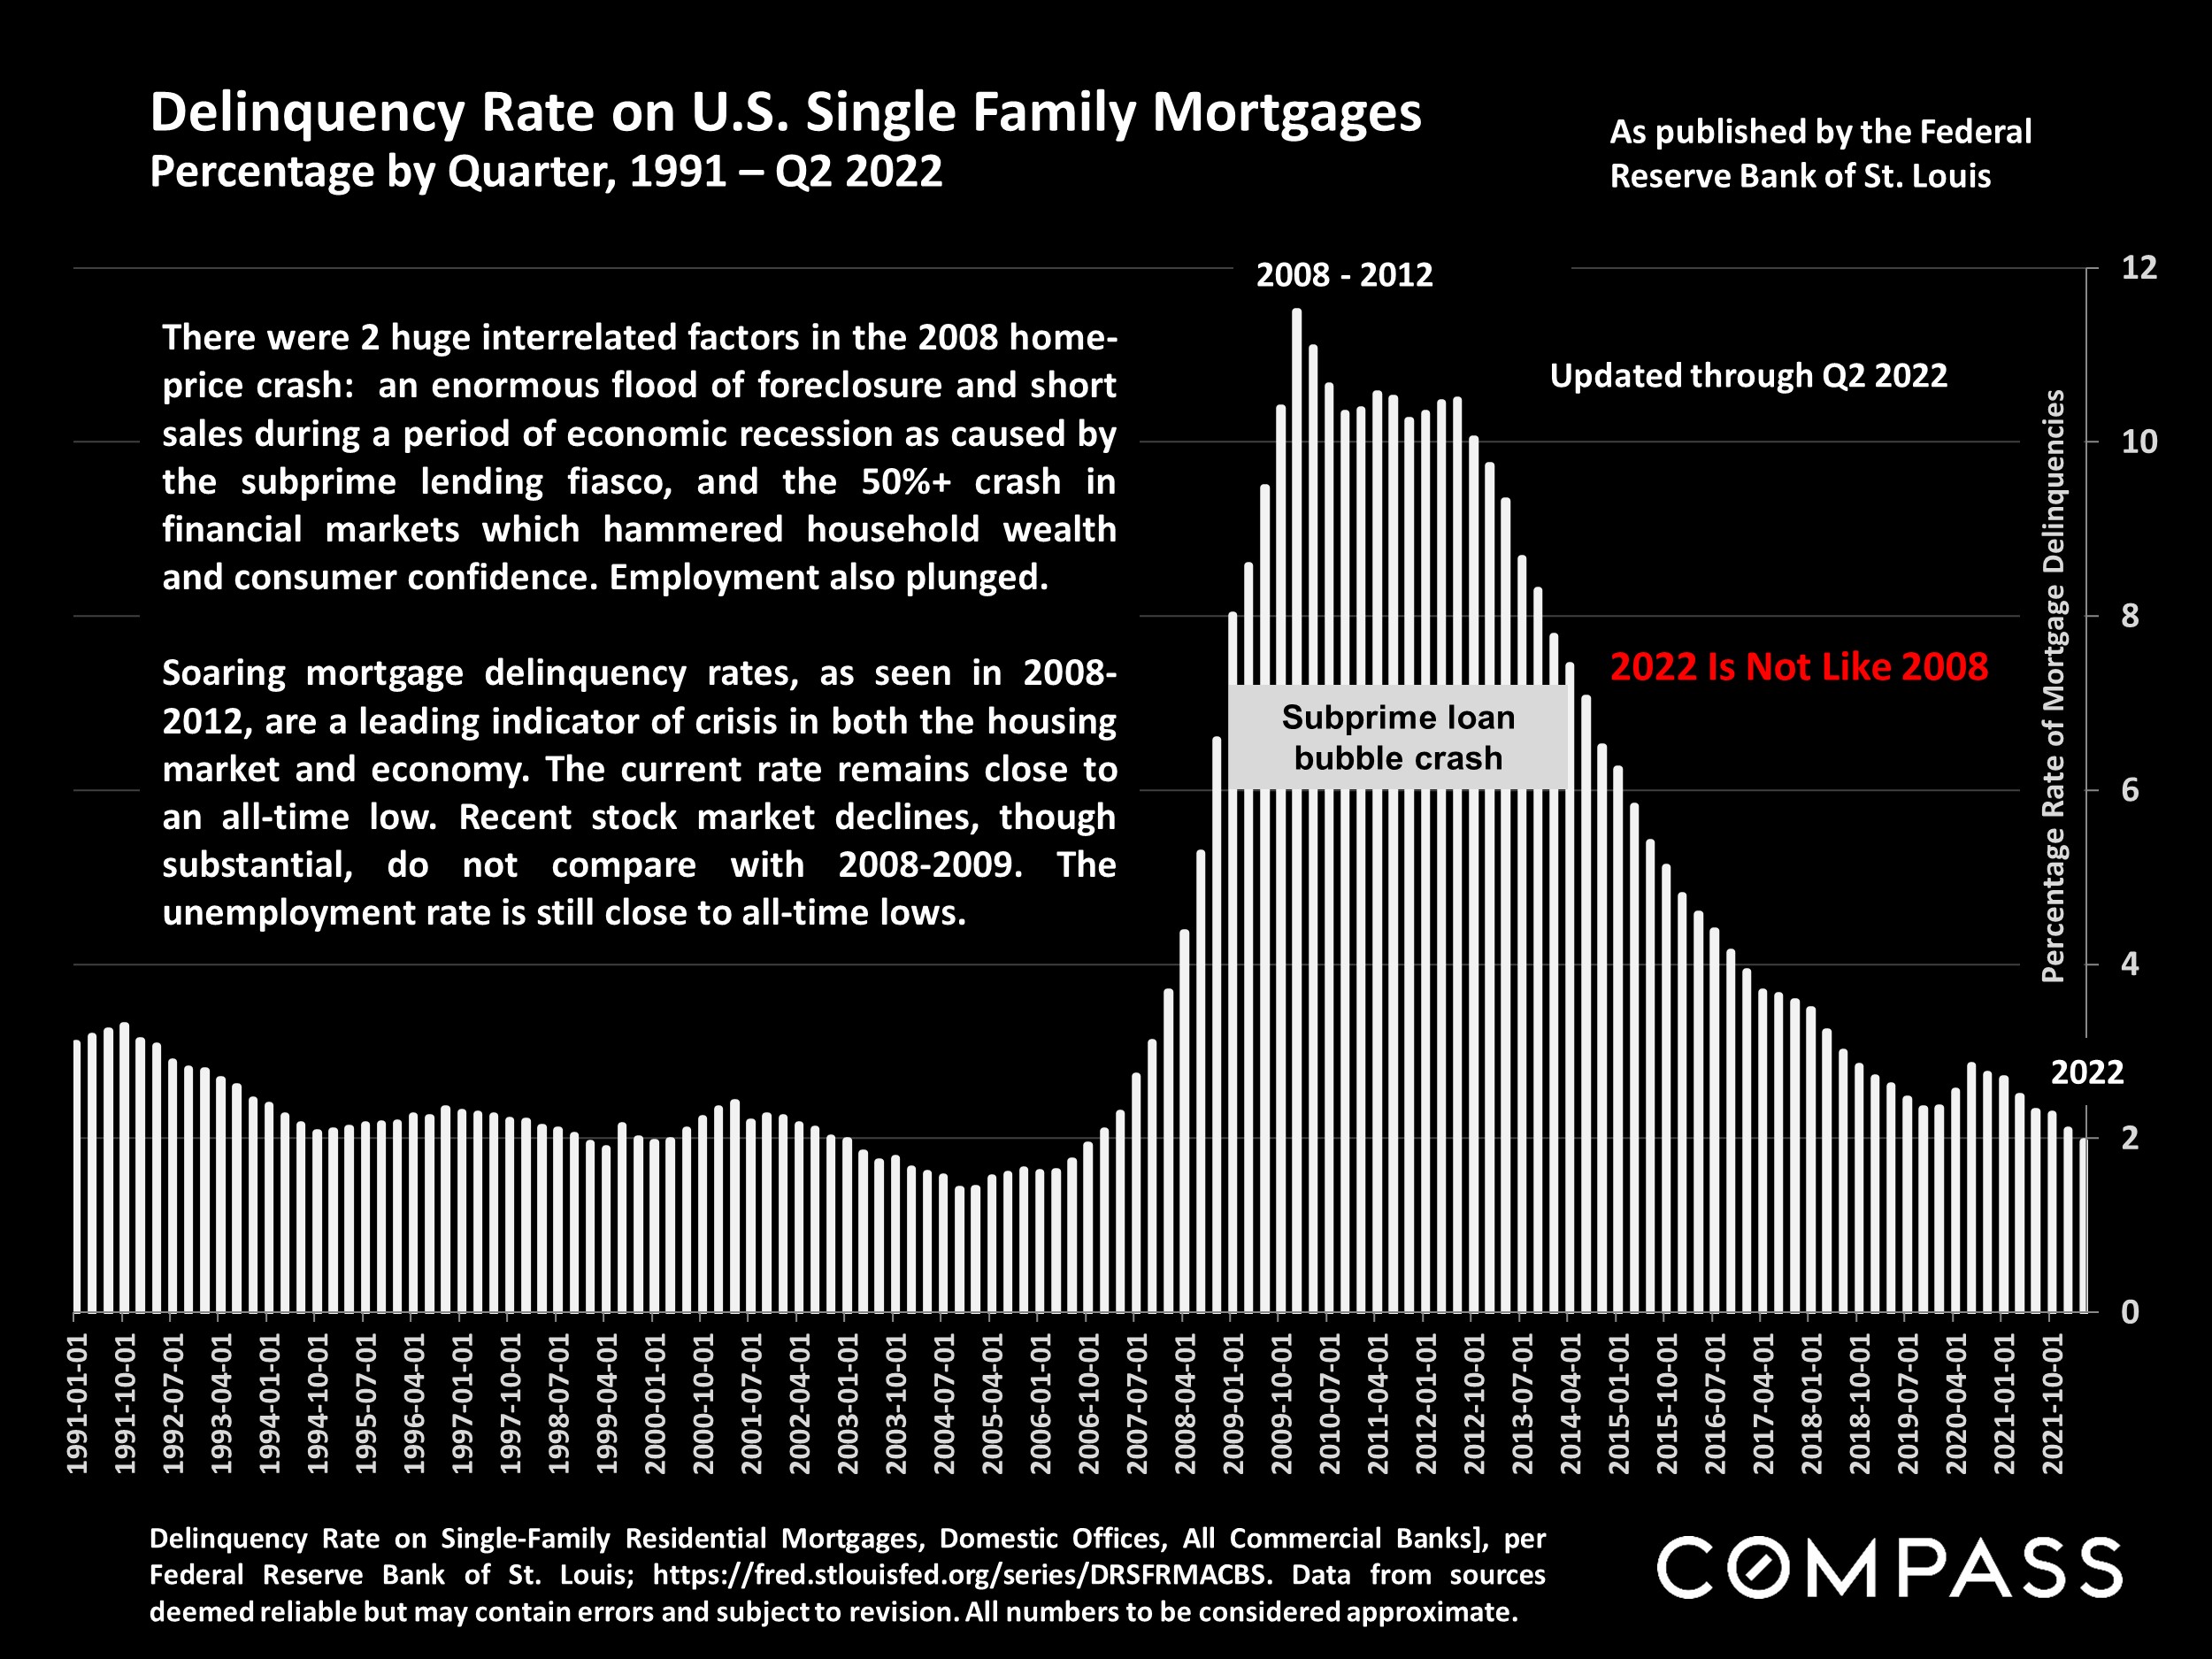 Delinquency Rate on U.S. Single Family Mortgages